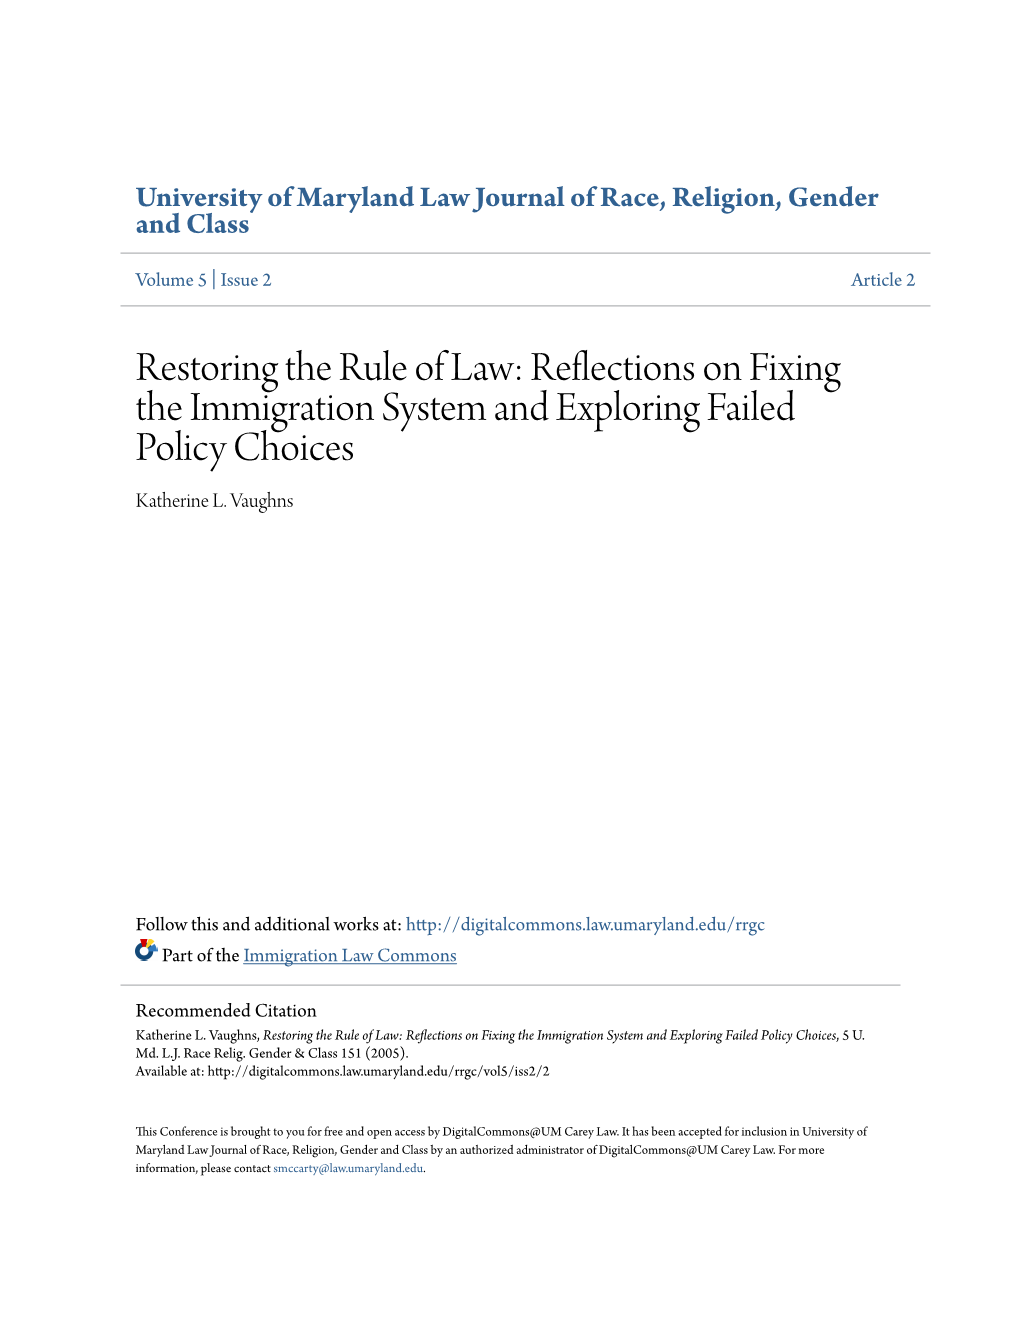 Restoring the Rule of Law: Reflections on Fixing the Immigration System and Exploring Failed Policy Choices Katherine L